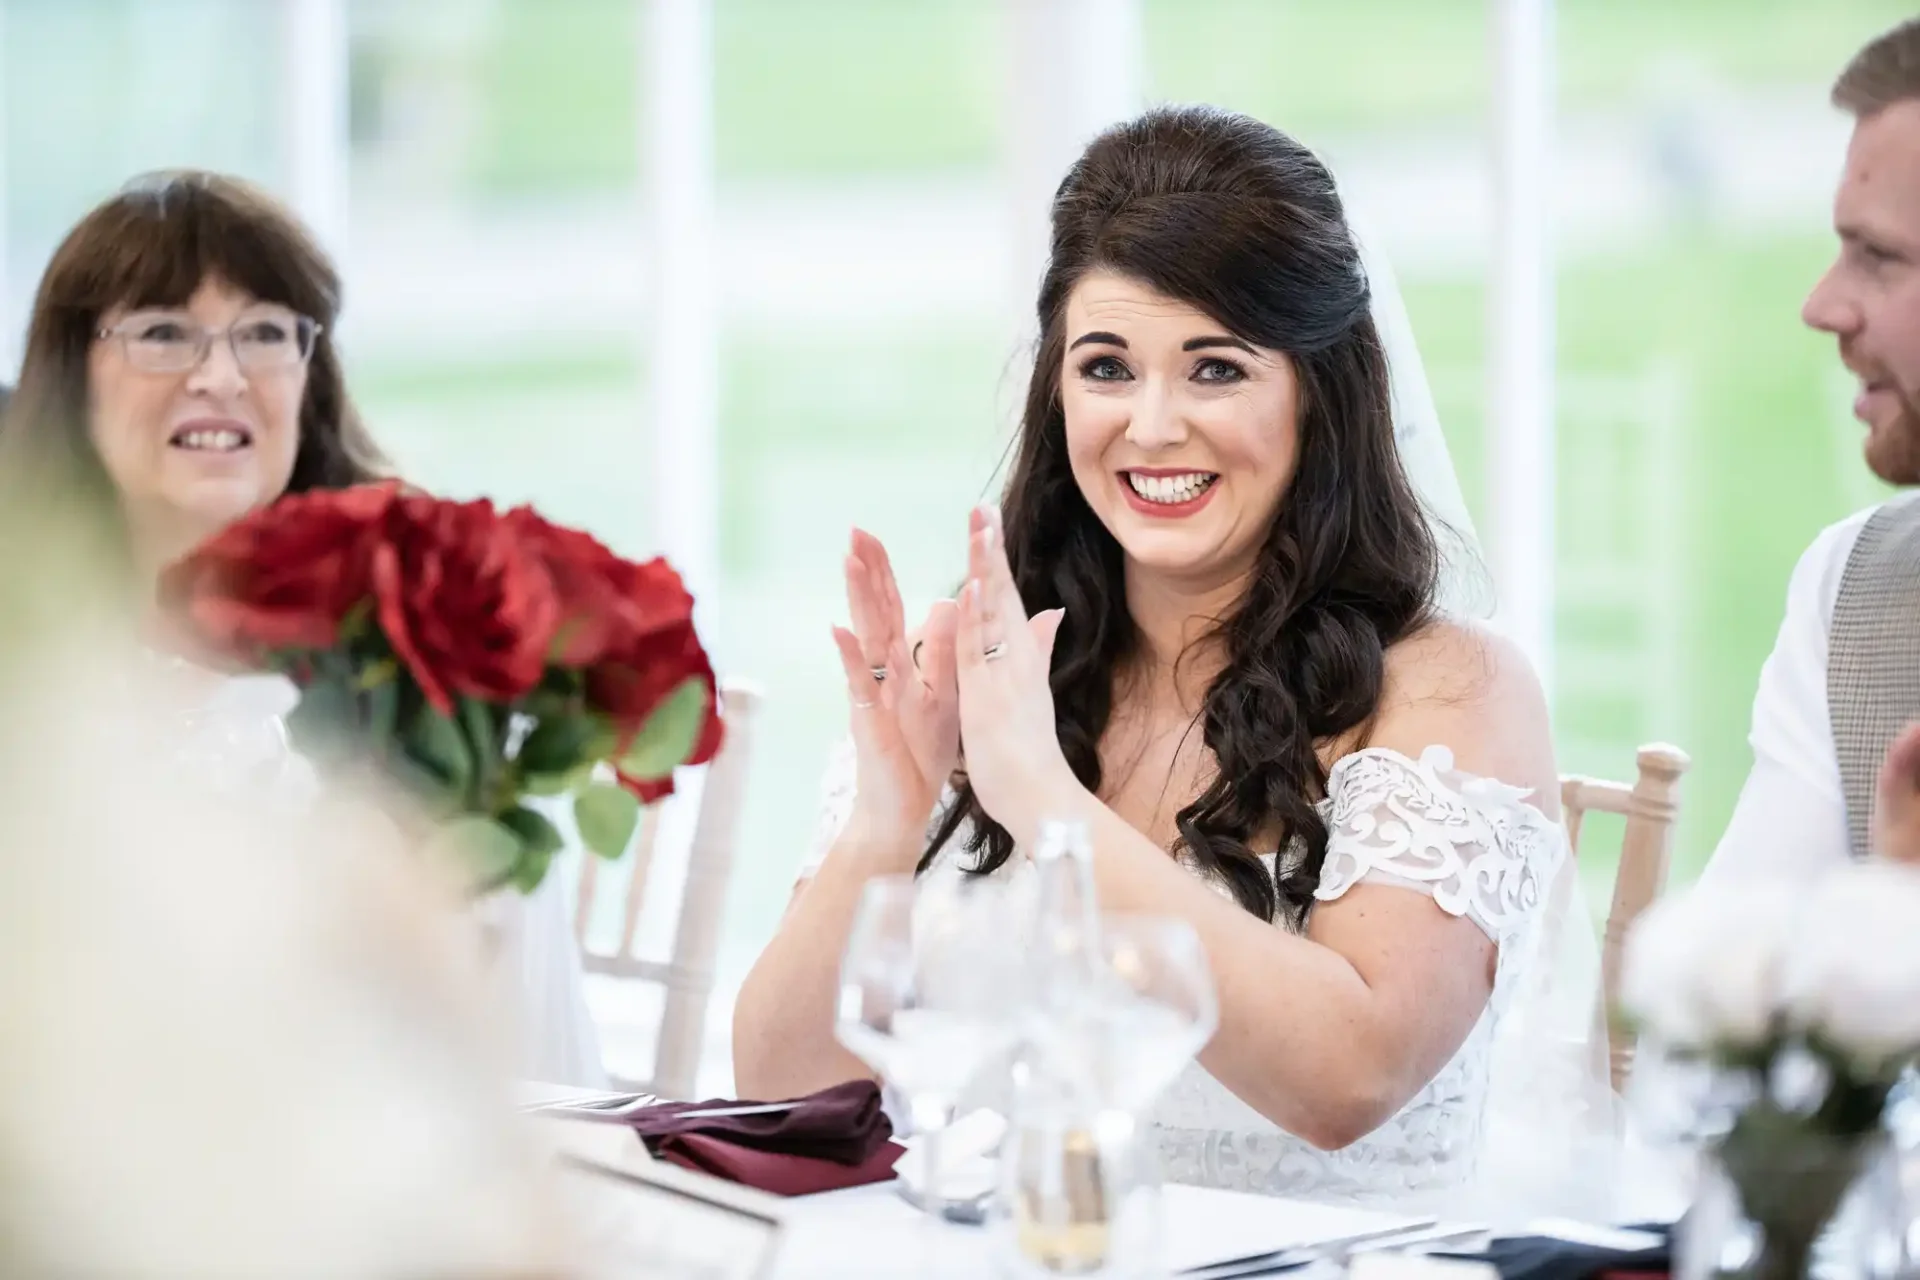 A bride smiling joyfully at a wedding table, clapping her hands, with guests and red roses nearby.